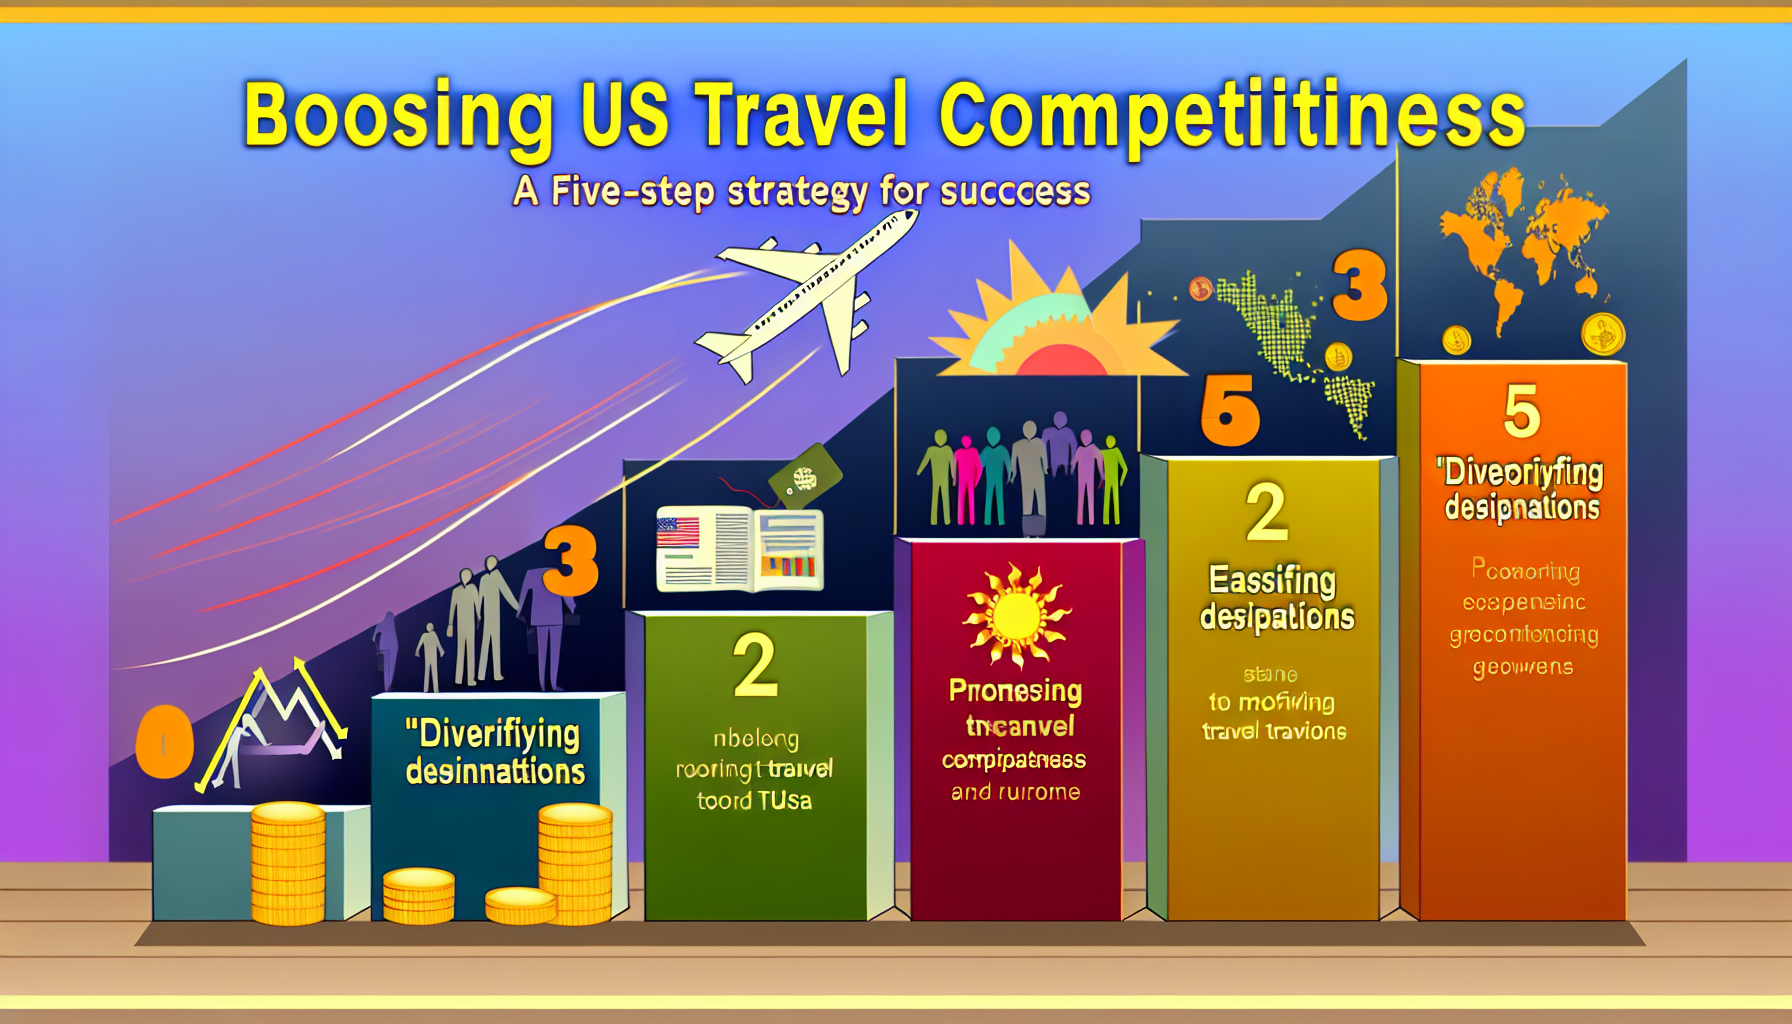 Boosting US travel competitiveness: a five-step strategy for success